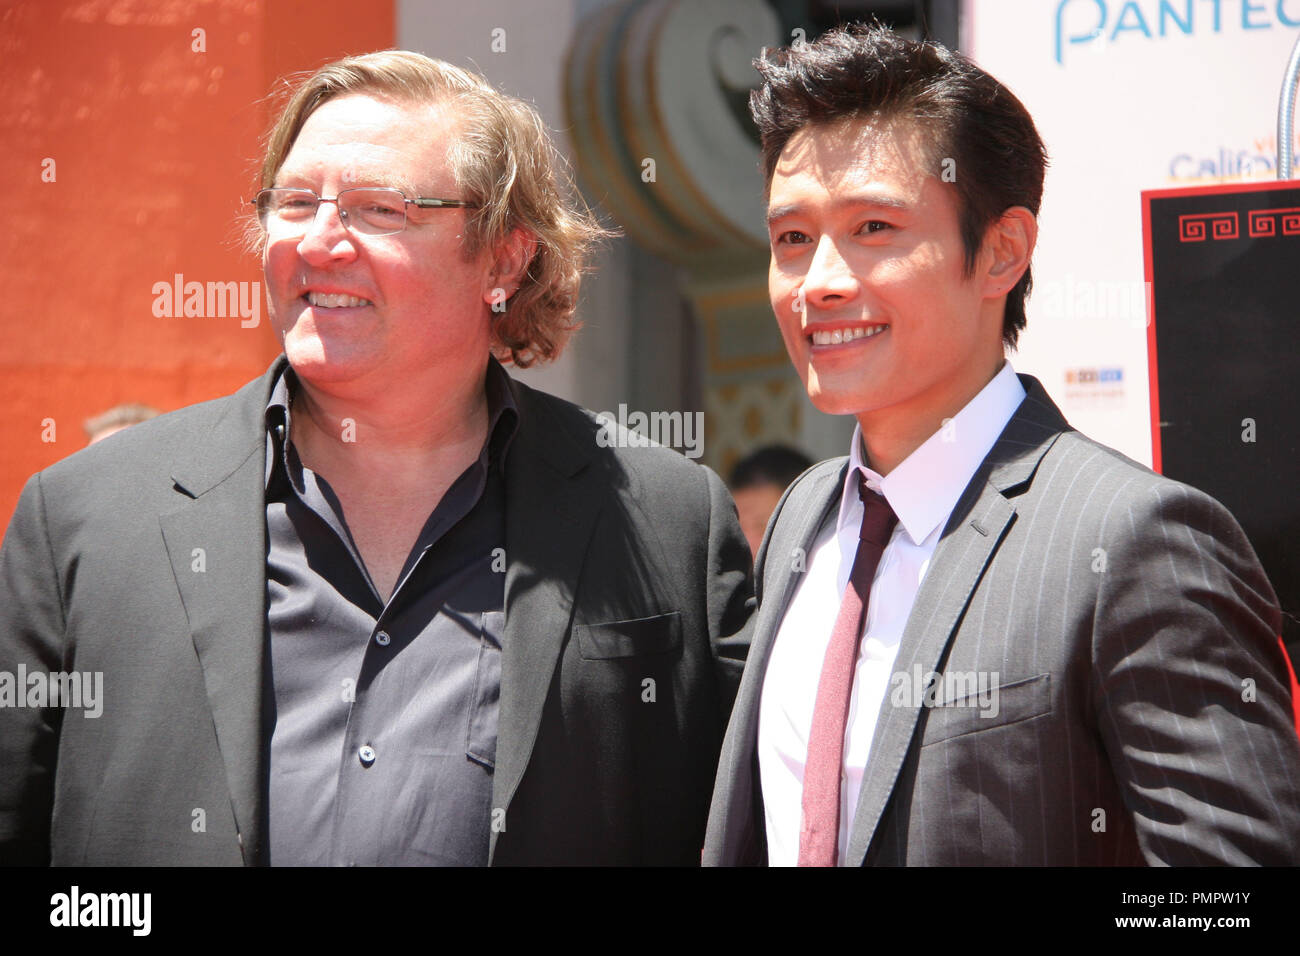 Lee Byong-Hun, Lorenzo di Bonaventura 06/23/2012 The Look East Korean Film Festival 2012 Hand and Foot Print Ceremony held at the Grauman's Chinese Theatre in Los Angeles, CA  Photo by Tom Marcus / HollywoodNewsWire.net / PictureLux Stock Photo